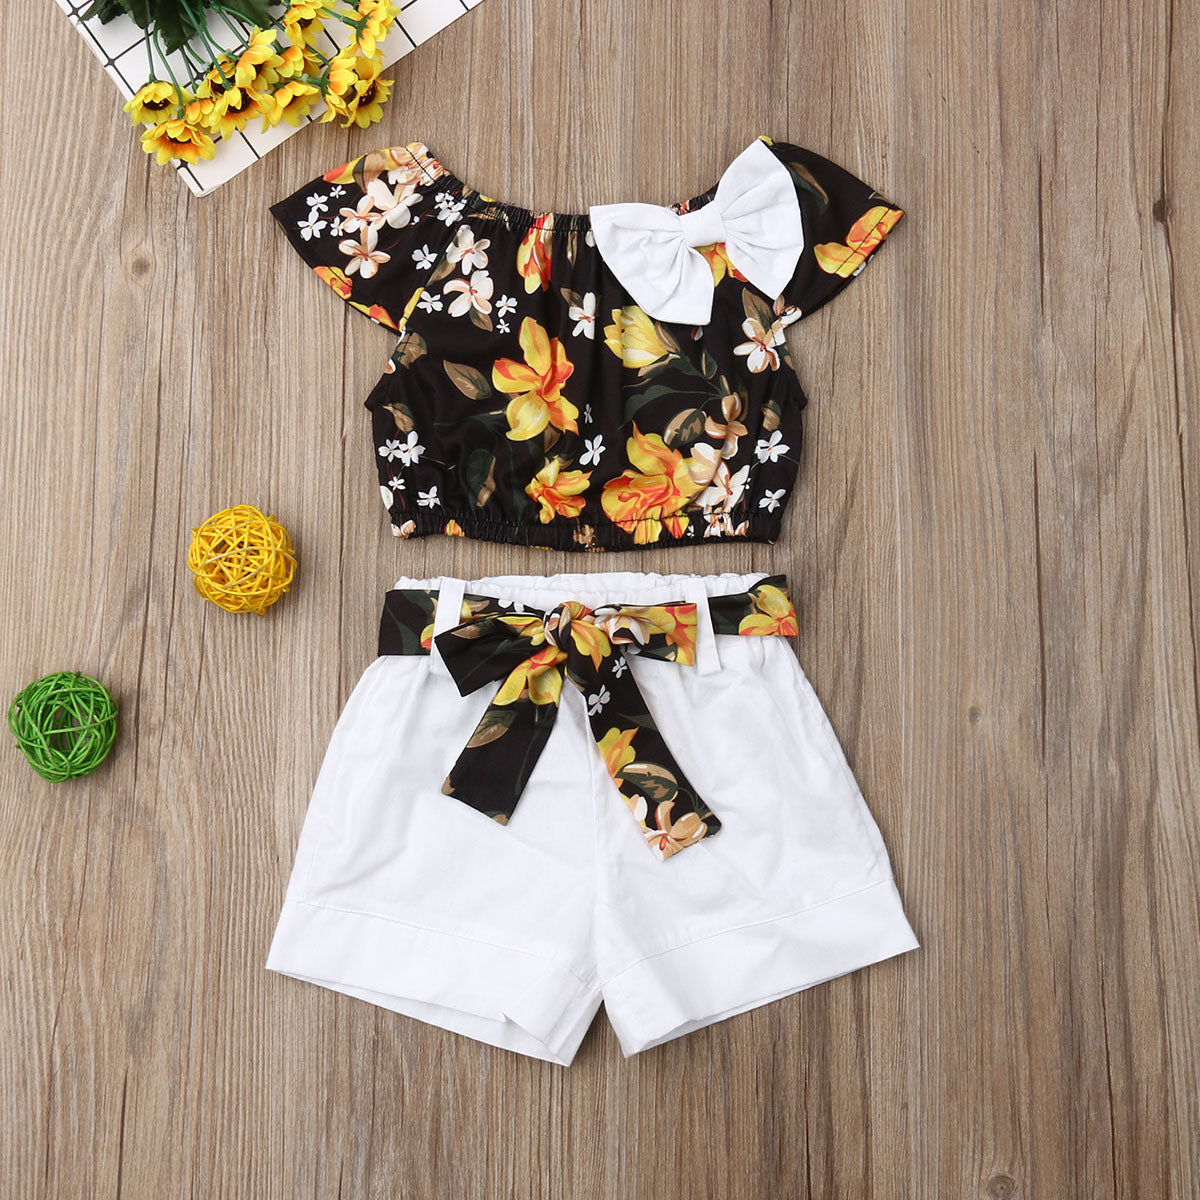 Baby Kid Girls Summer Floral Top T-shirt Solid Short Pant 2 Piece Set Outfits Set The Clothing Company Sydney